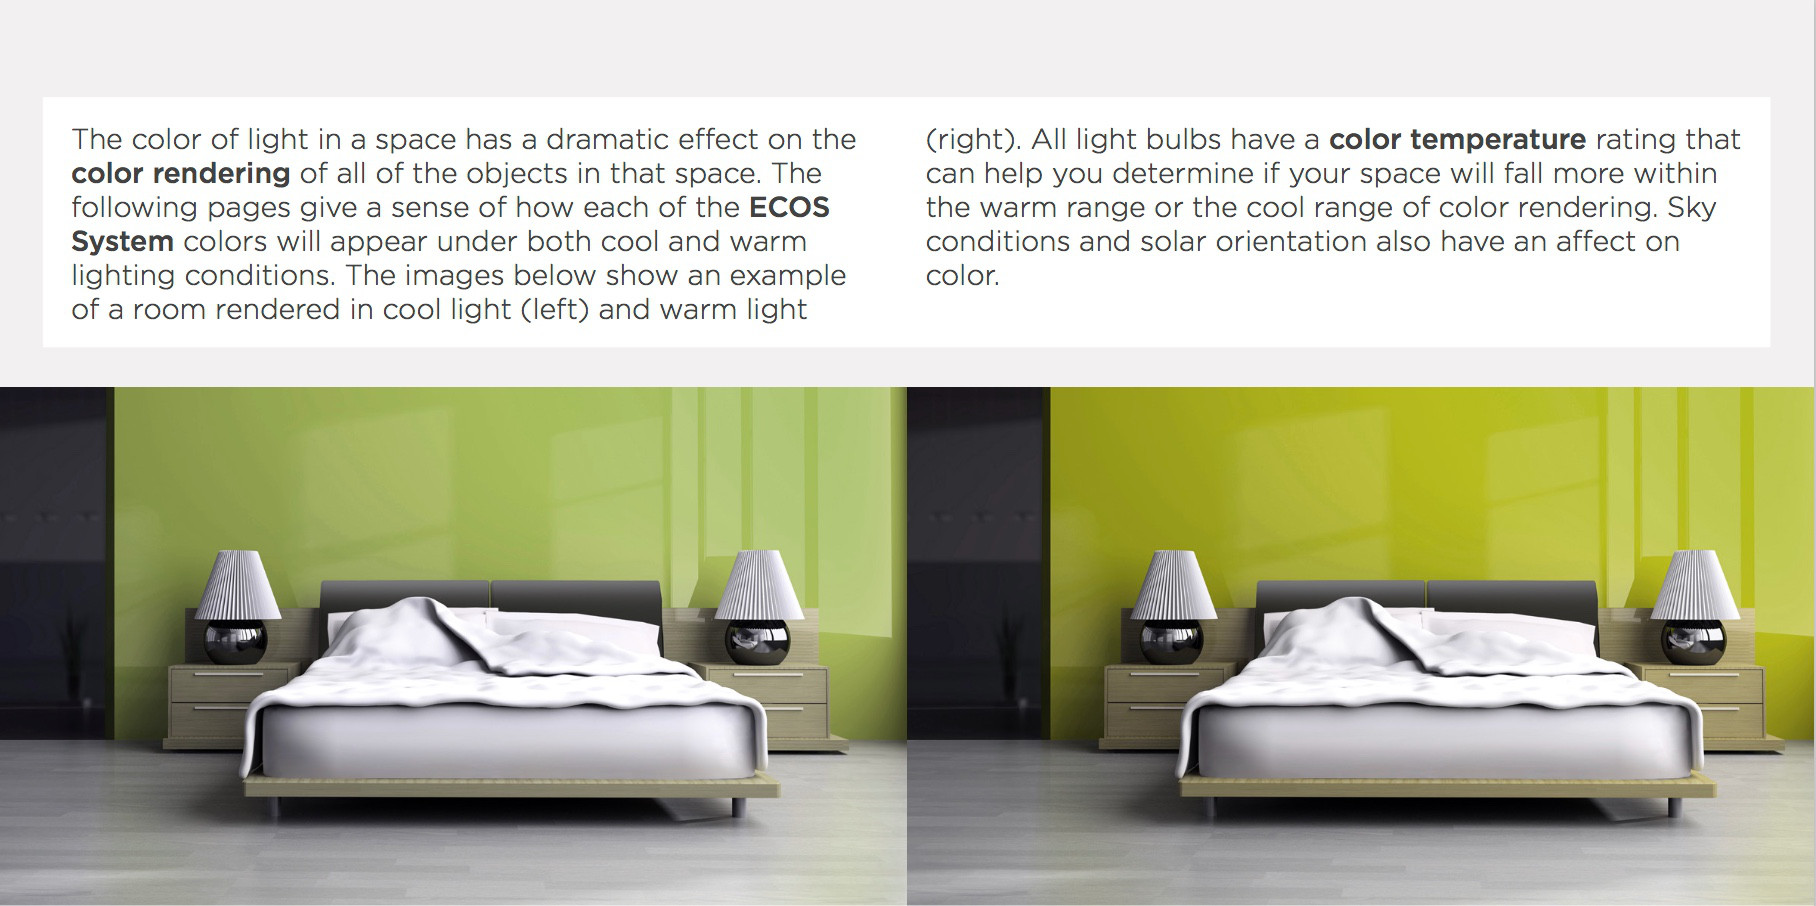 The color of light in a space has a dramatic effect on the color rendering of all of the objects in that space. The following pages give a sense of how each of the ECOS System colors will appear under both cool and warm lighting conditions. The images below show an example of a room rendered in cool light (left) and warm light (right). All light bulbs have a color temperature rating that can help you determine if your space will fall more within the warm range or the cool range of color rendering. Sky conditions and solar orientation also have an affect on color.